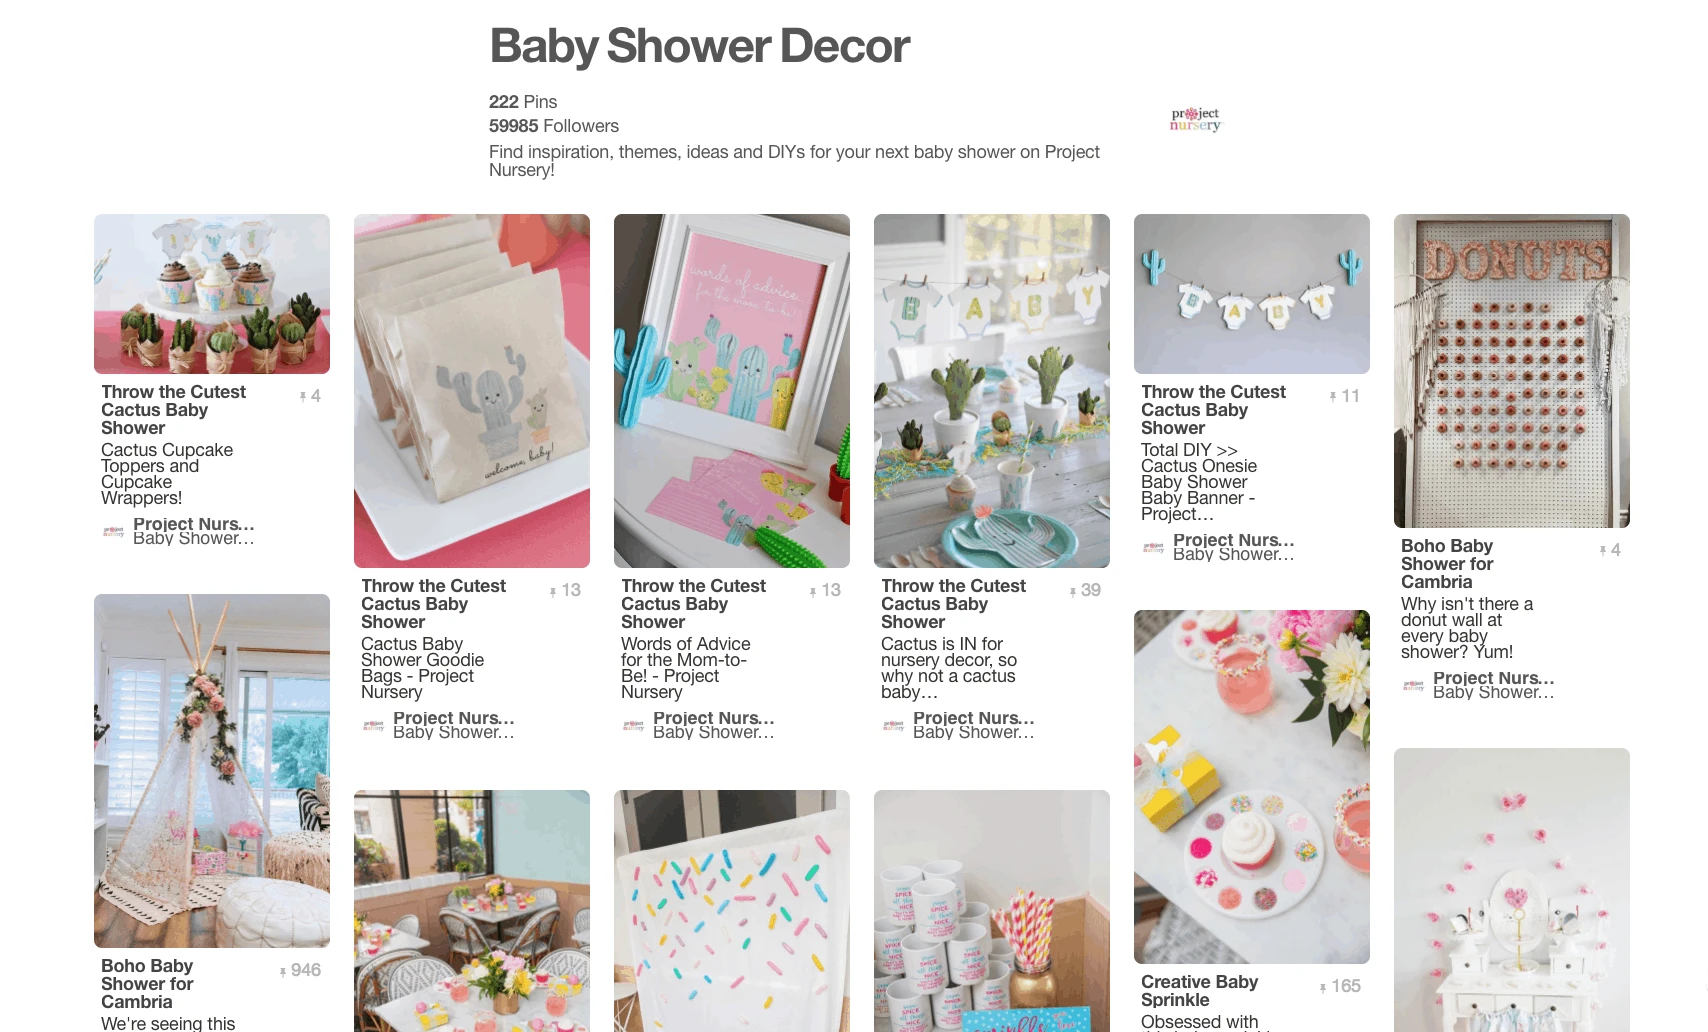 Collage of baby shower decor ideas.